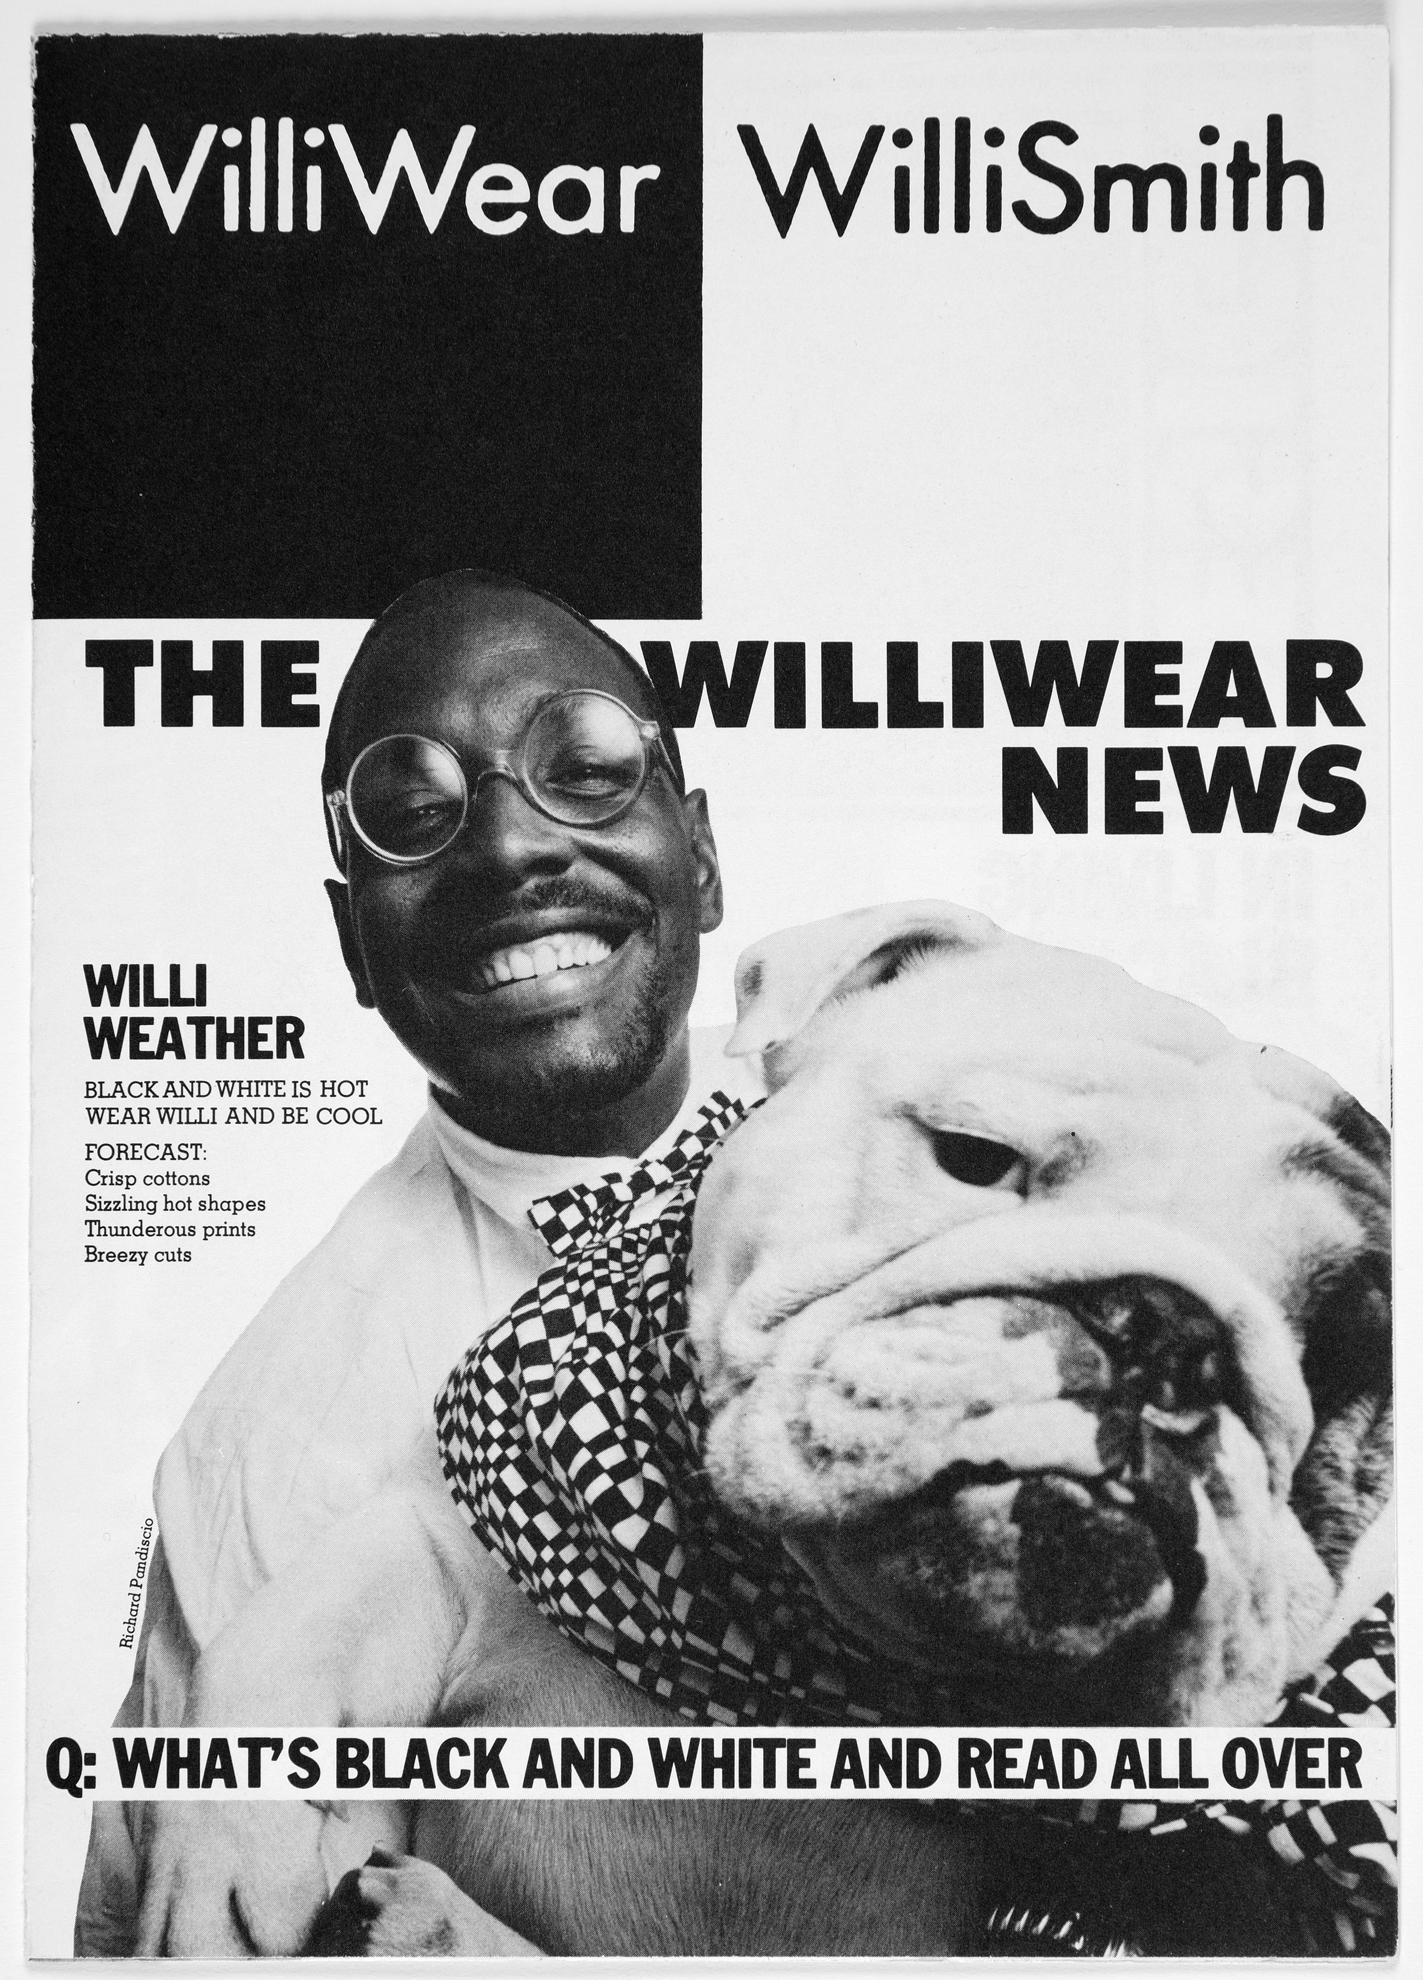 A poster with a man in glasses, a white shirt, black and white bow tie, a bull dog with a black and white scarf with text that says WilliWear WilliSmith, The Williwear News, Willi Weather. Q: What's black and white and read all over